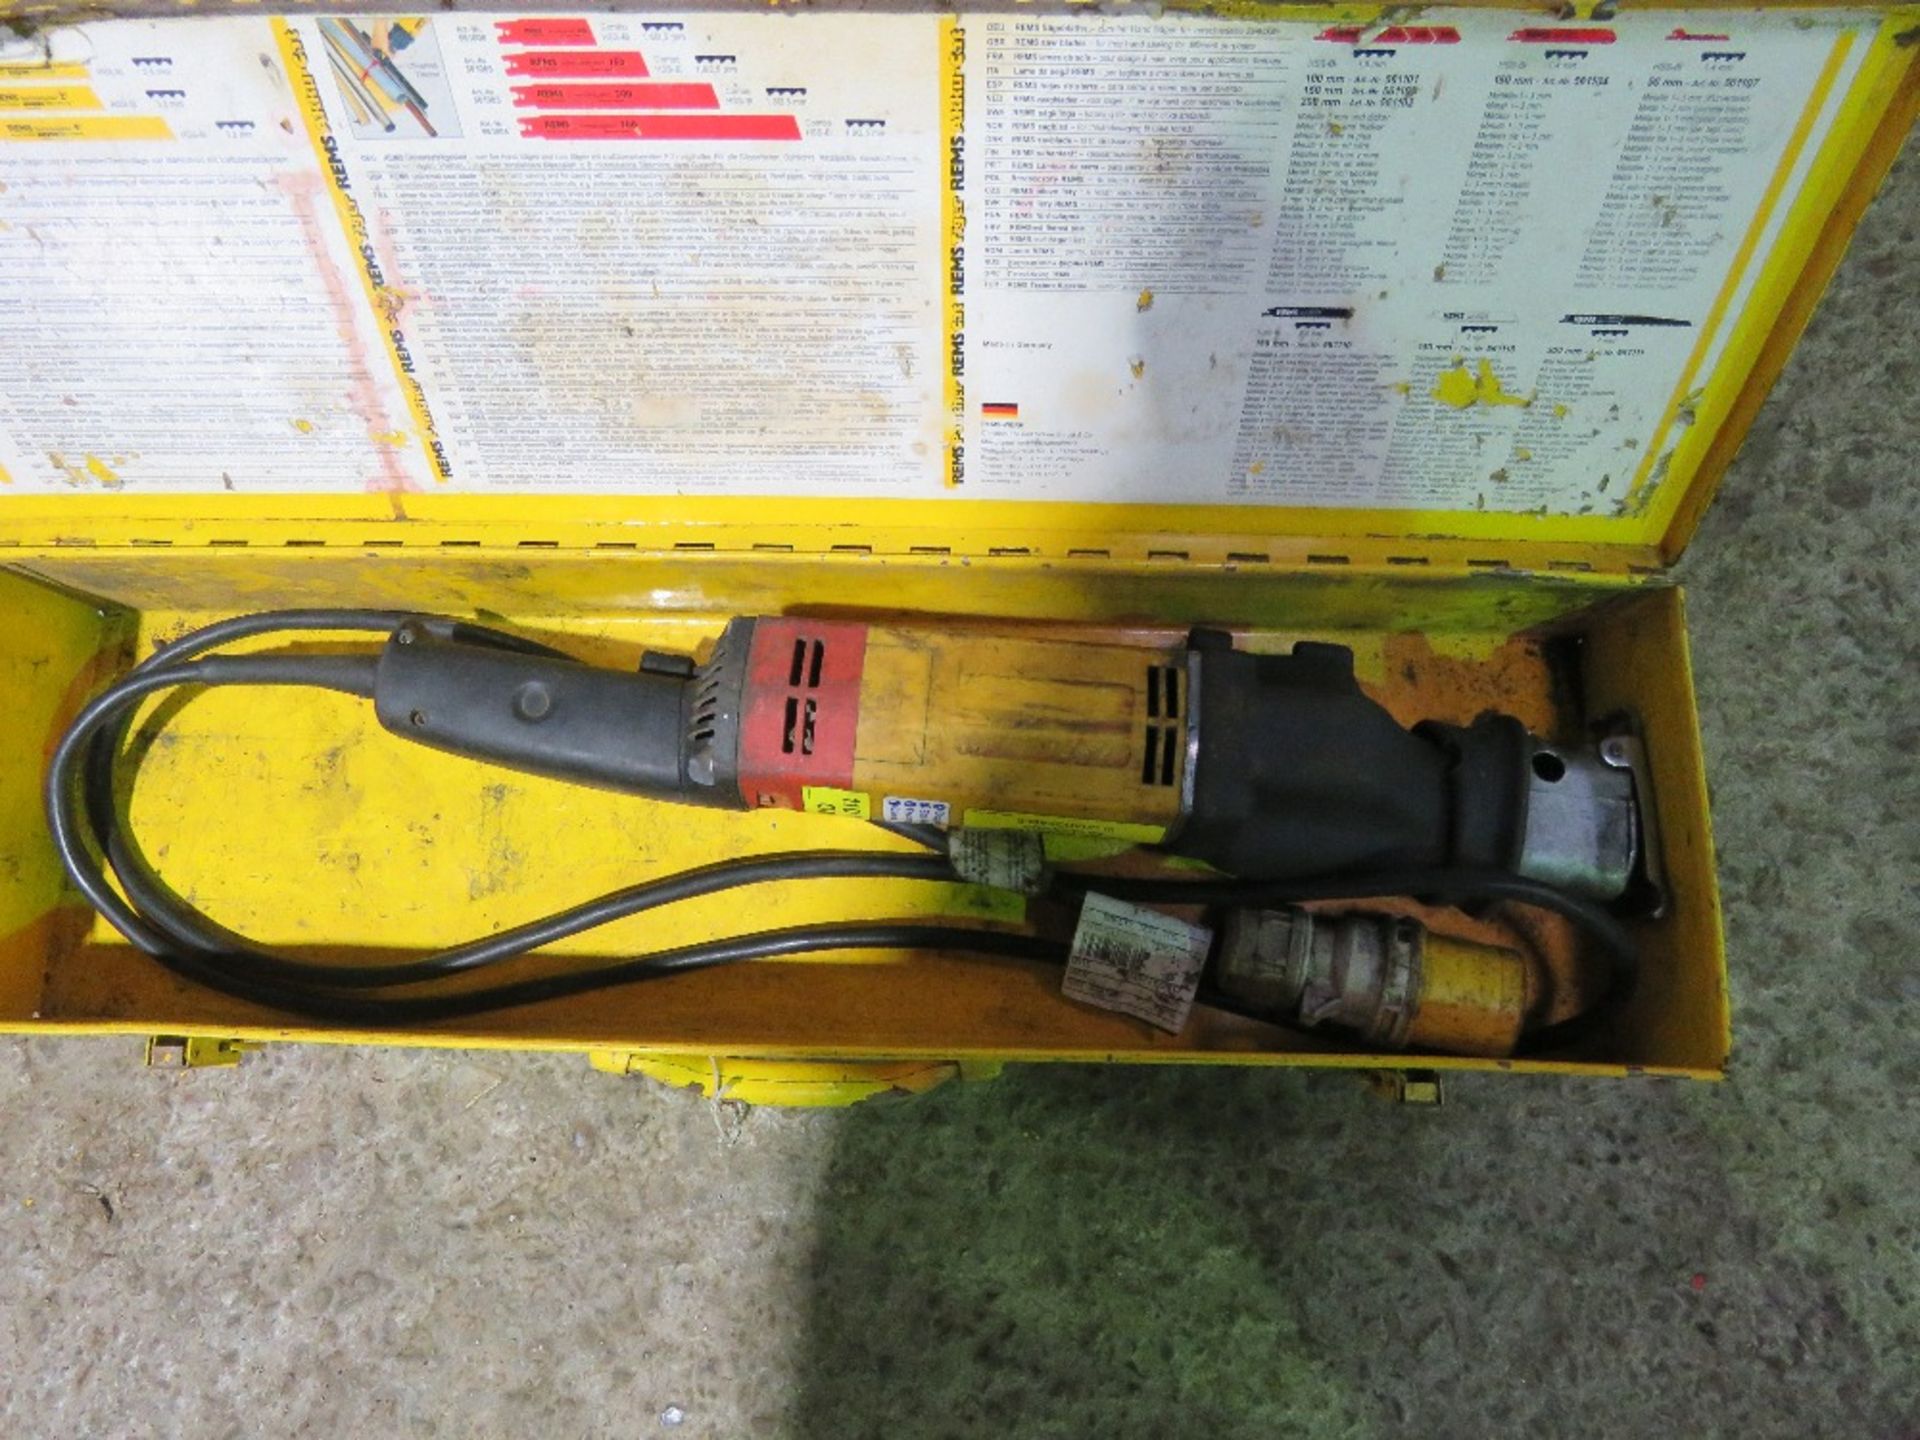 REMS 110VOLT TIGER PIPE SAW.